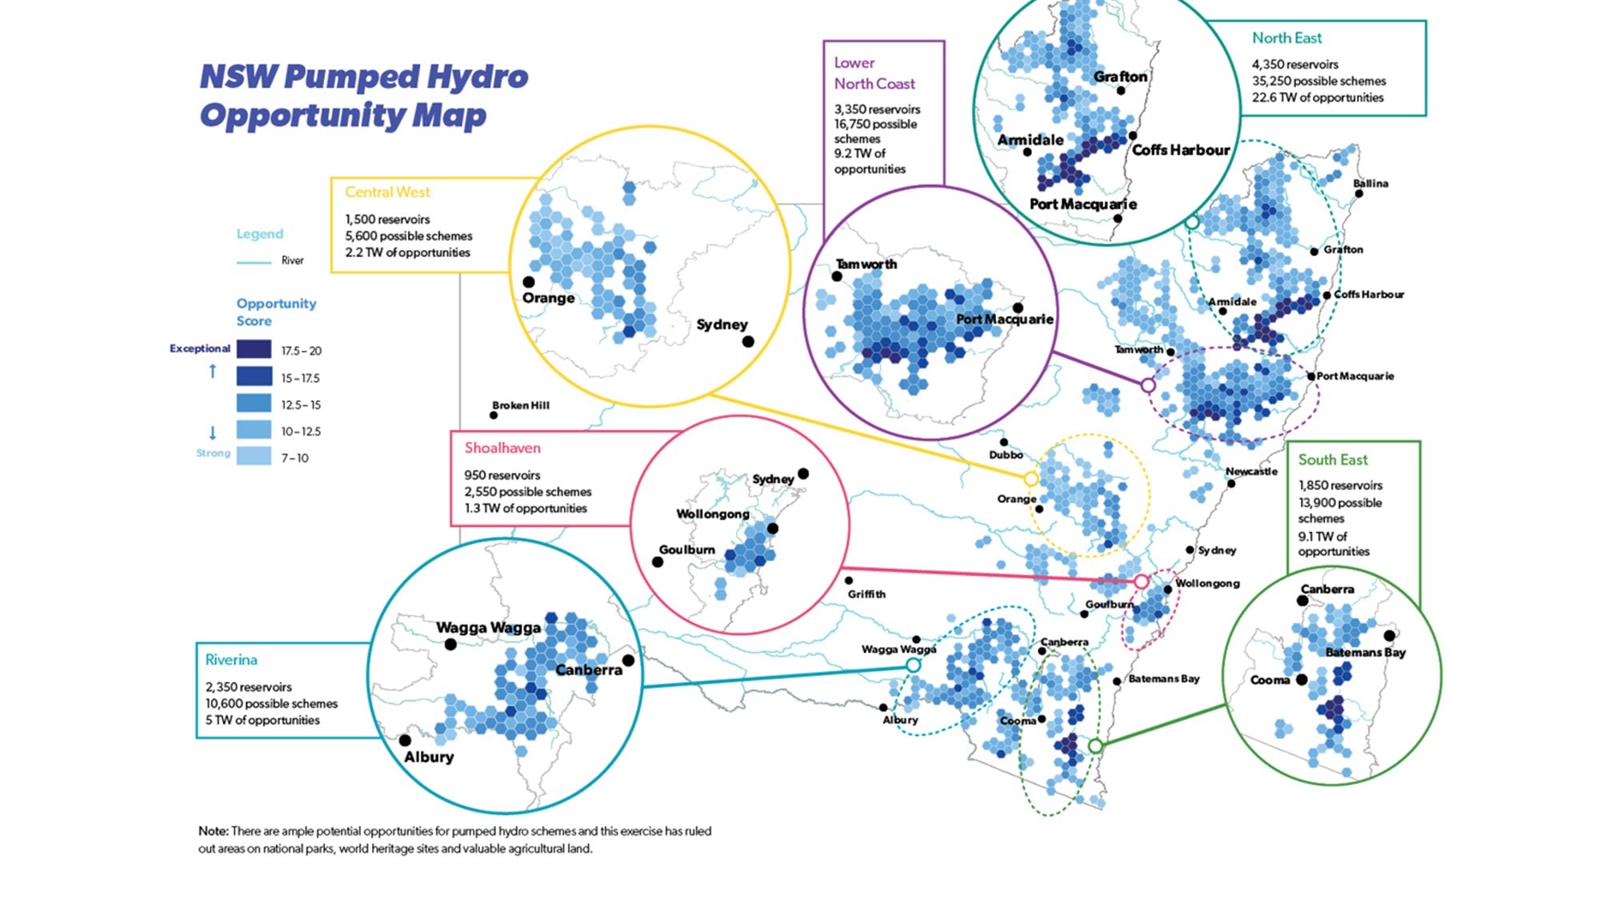 Opportunity map for pumped hydro in NSW